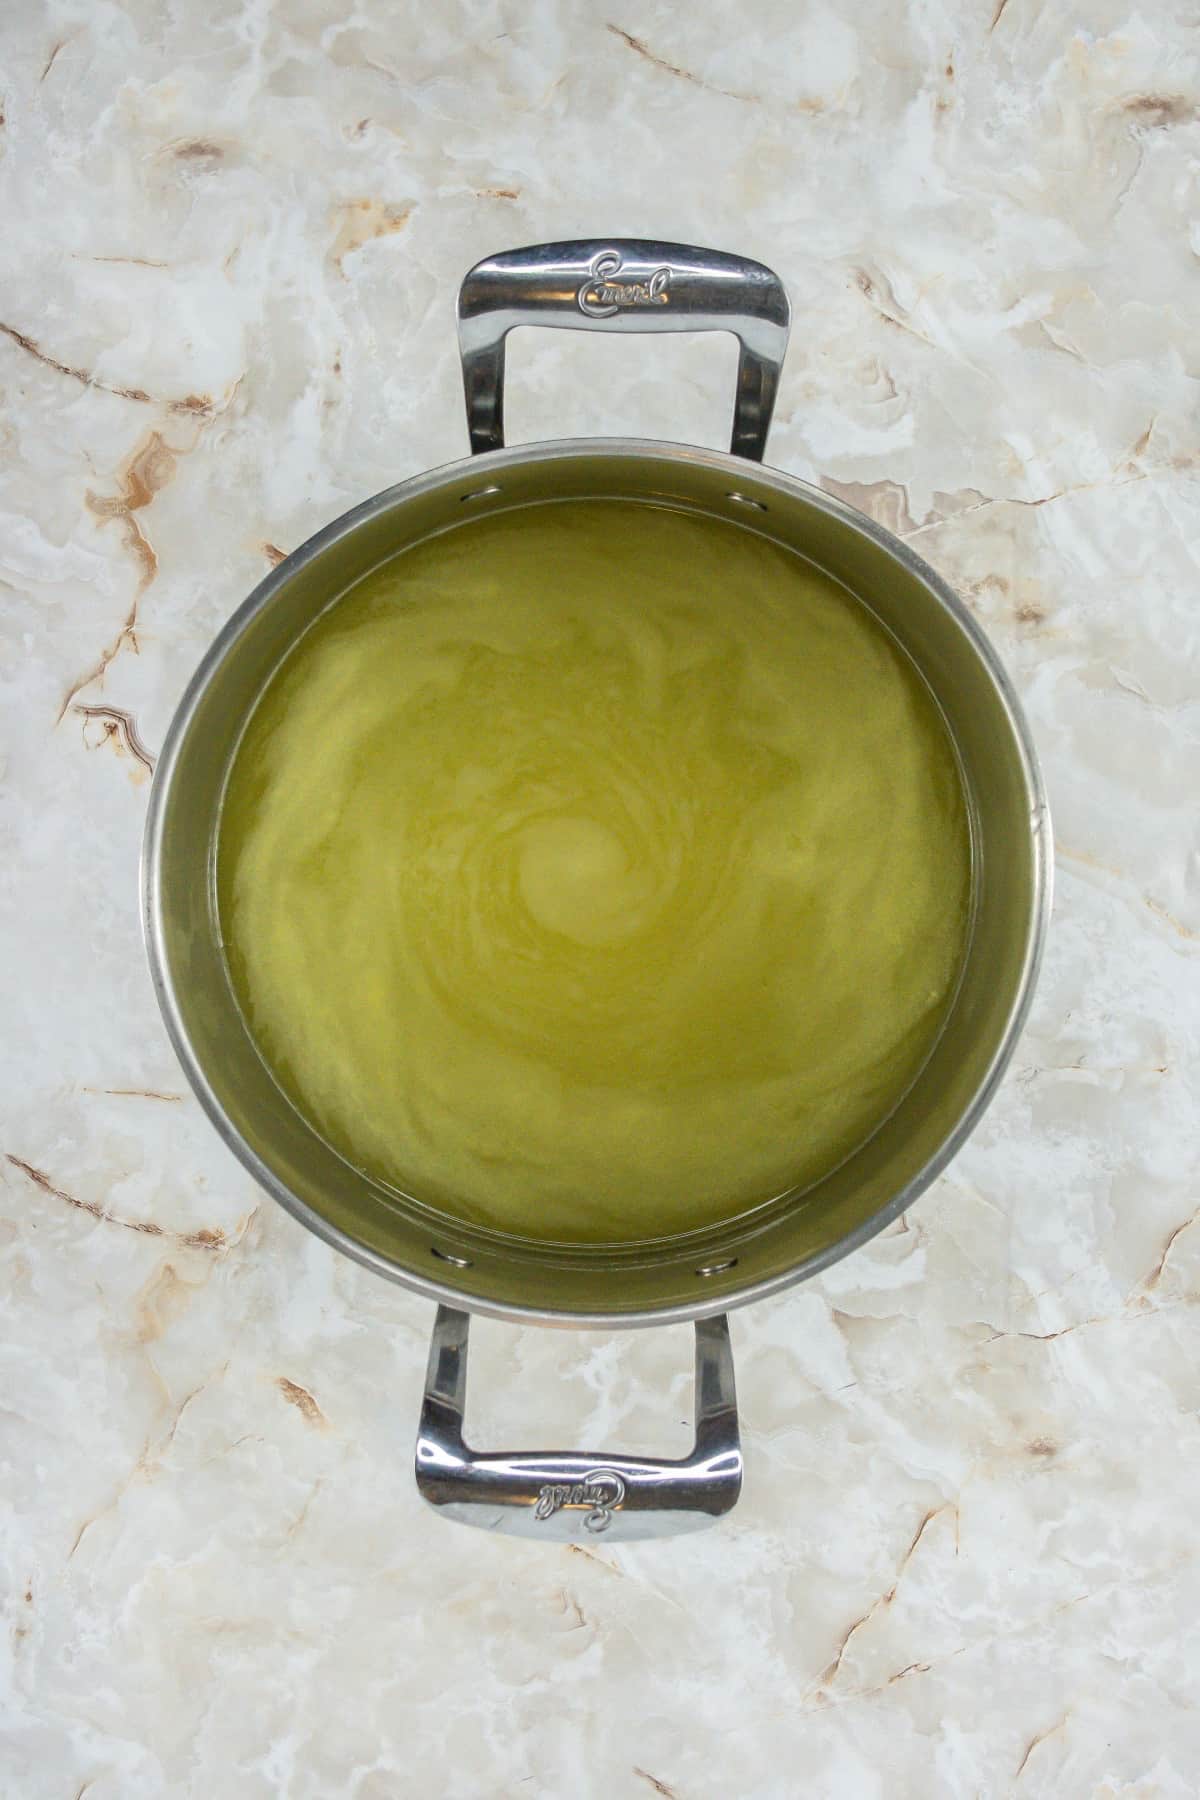 Chicken broth in a pot on a marble surface.